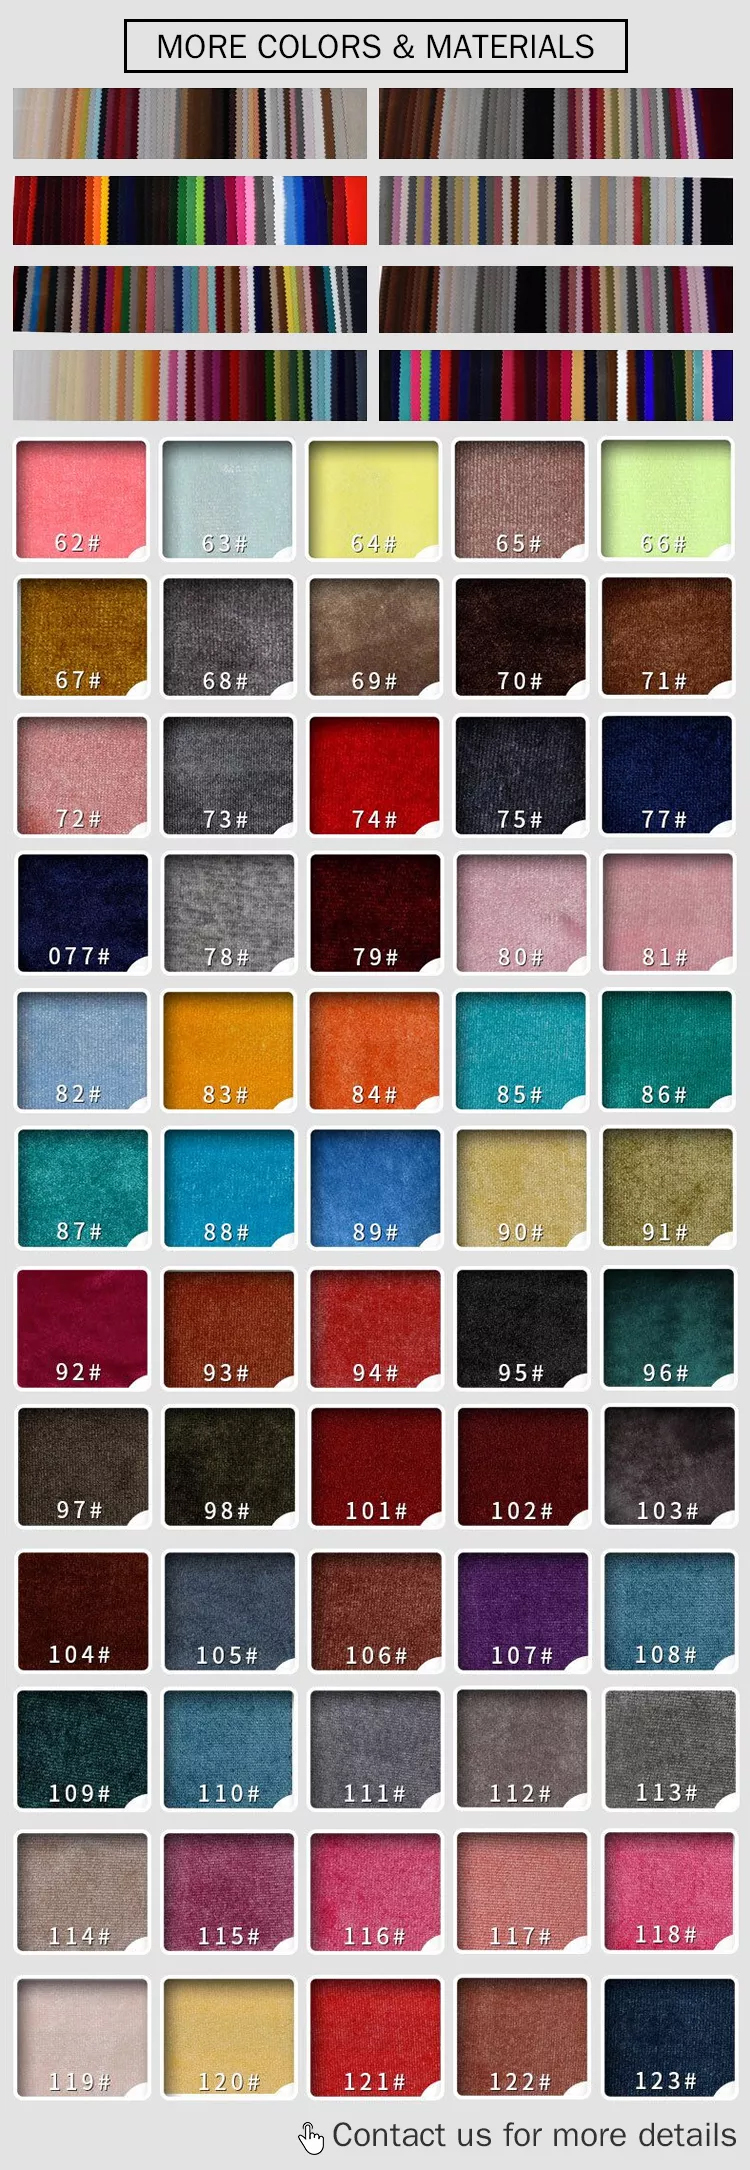 Available velvet fabric colors